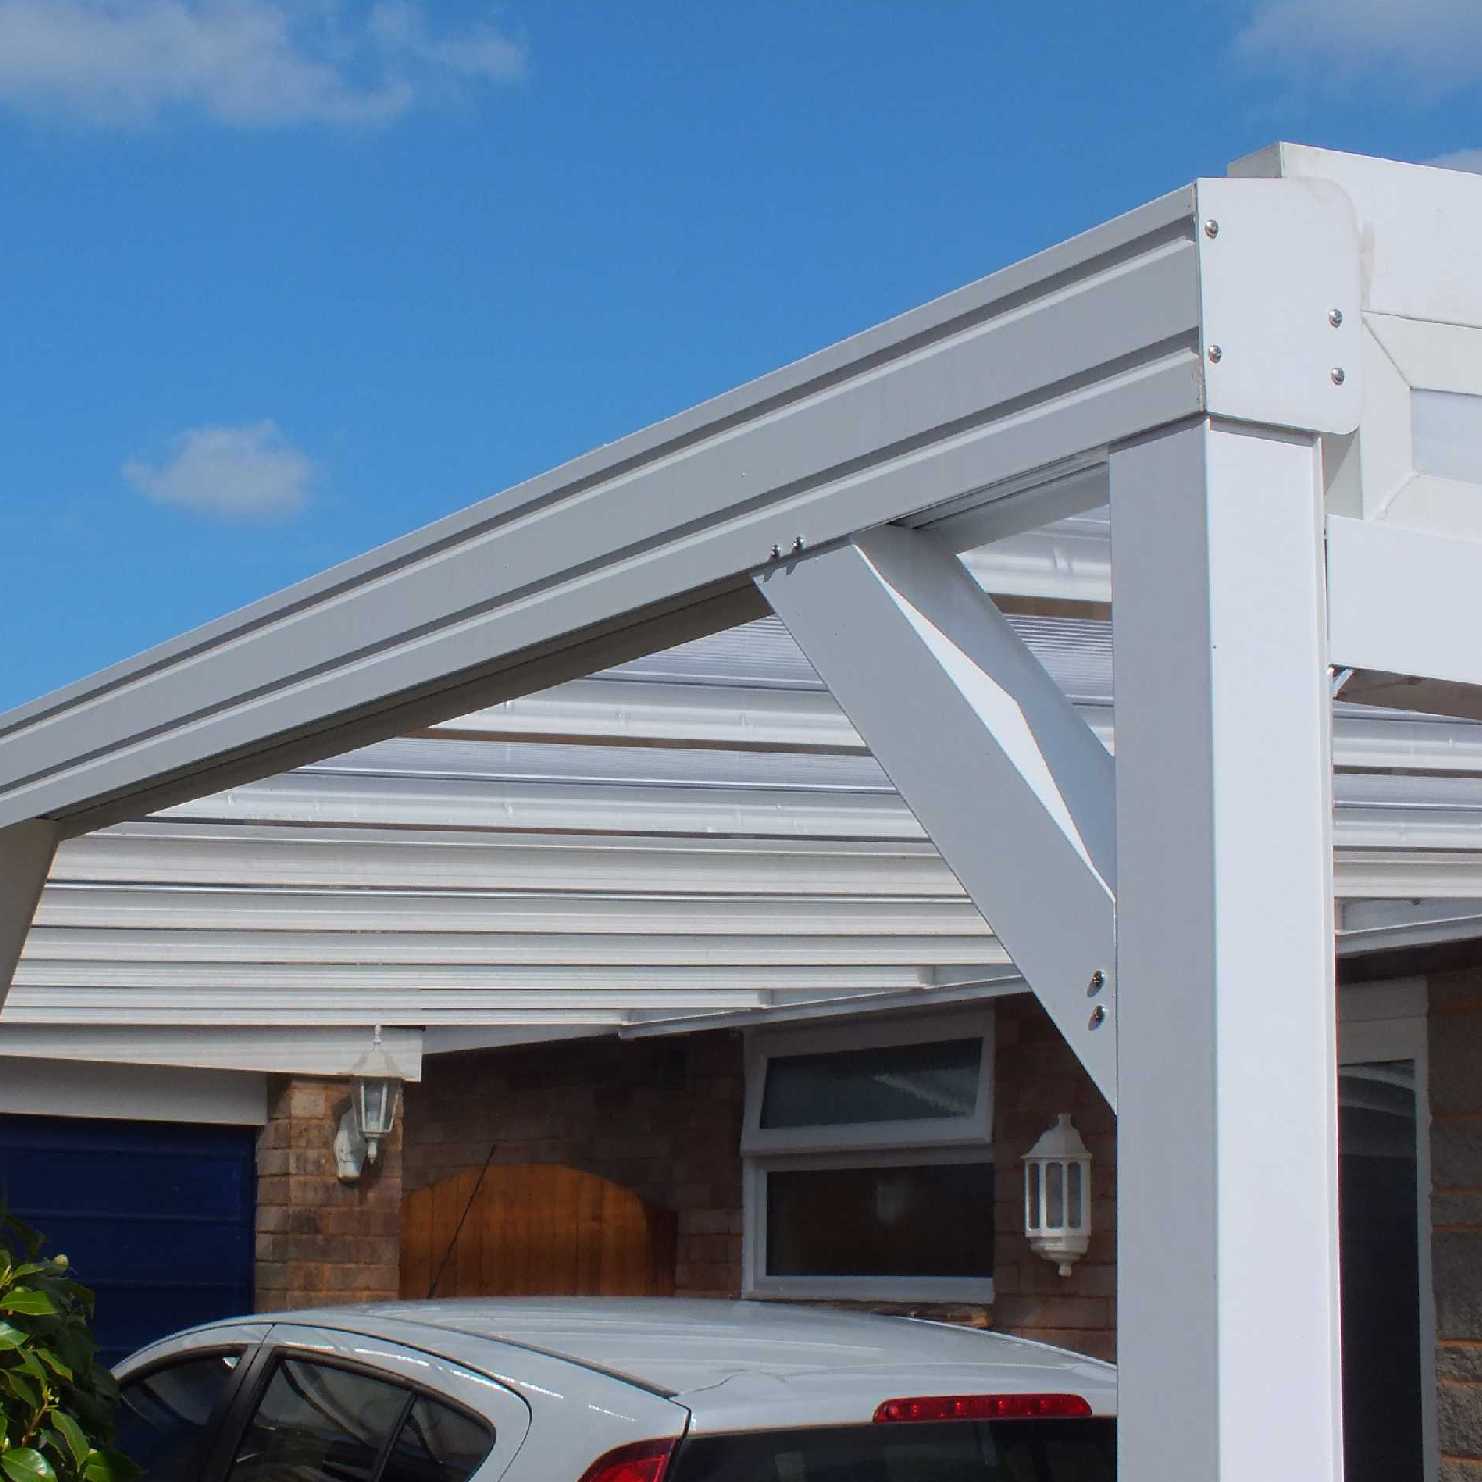 Buy Omega Smart Lean-To Canopy, White with 16mm Polycarbonate Glazing - 9.5m (W) x 3.0m (P), (5) Supporting Posts online today